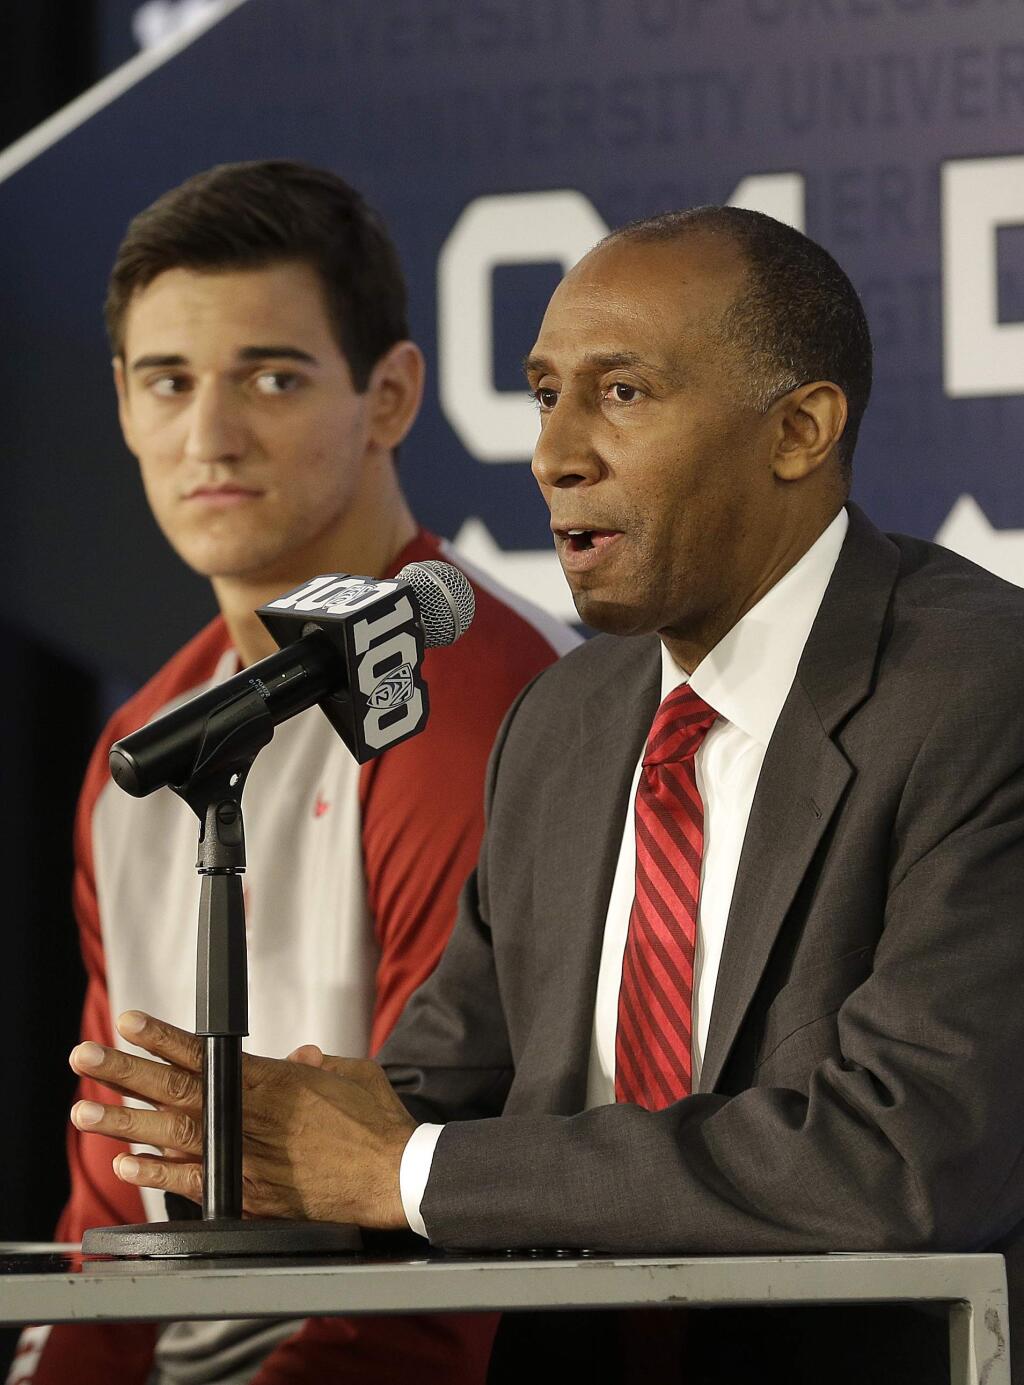 Stanford head coach Johnny Dawkins, right, speaks next to Rosco Allen during Pac-12 media day in San Francisco, Thursday, Oct. 15, 2015. (AP Photo/Jeff Chiu)